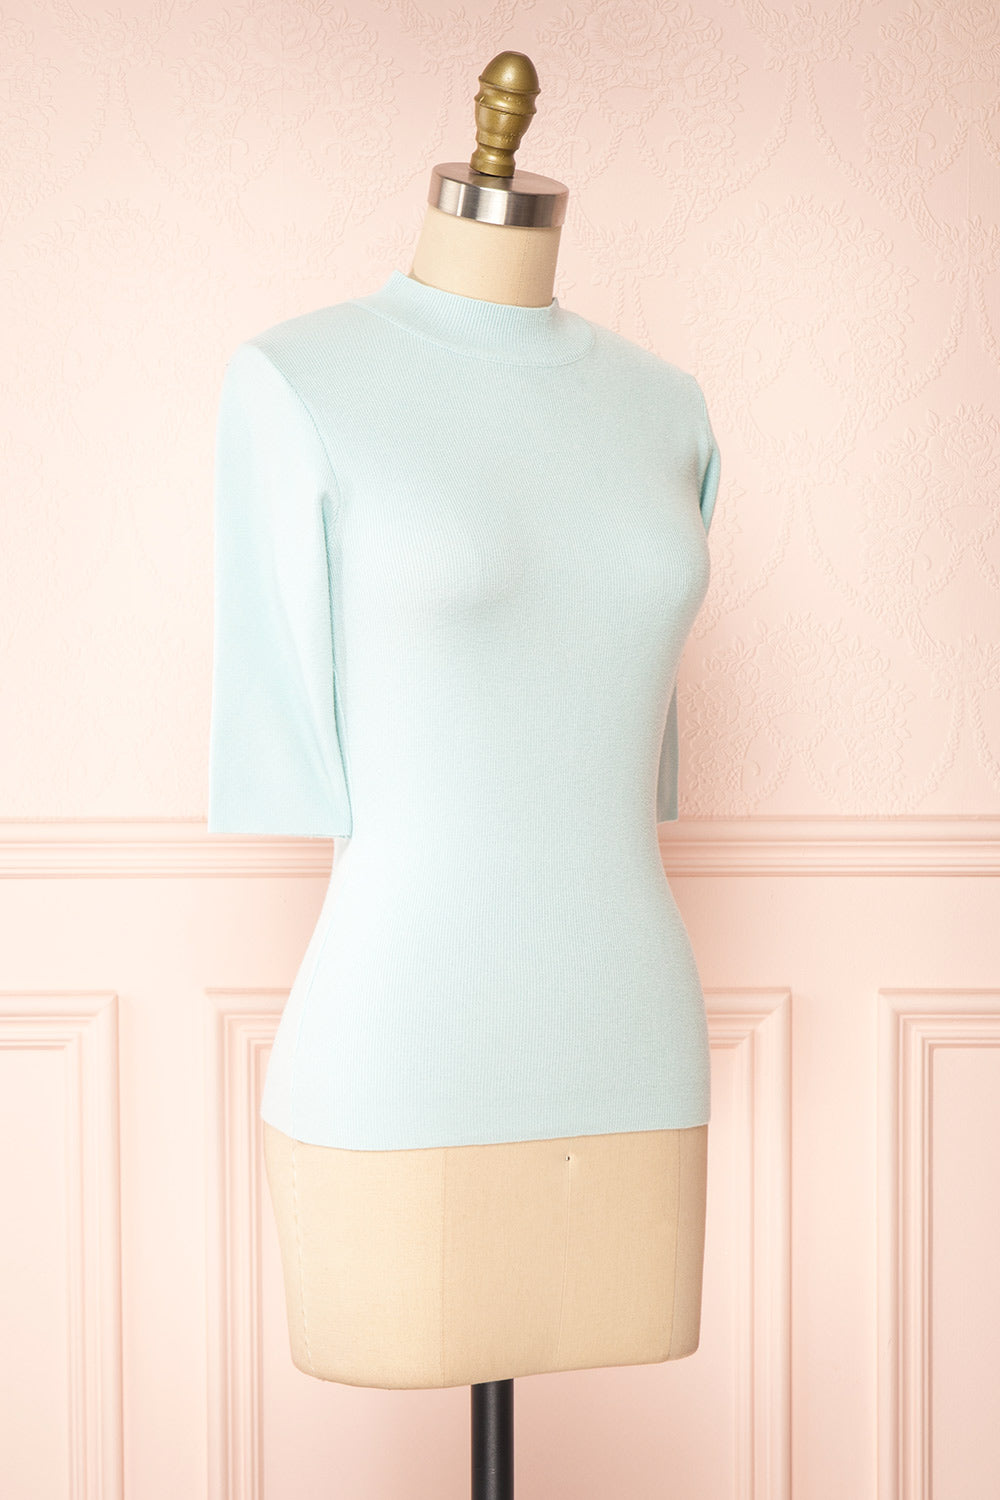 Nalleli Aqua Fitted Mock Top w/ Half Sleeves | Boutique 1861 side view